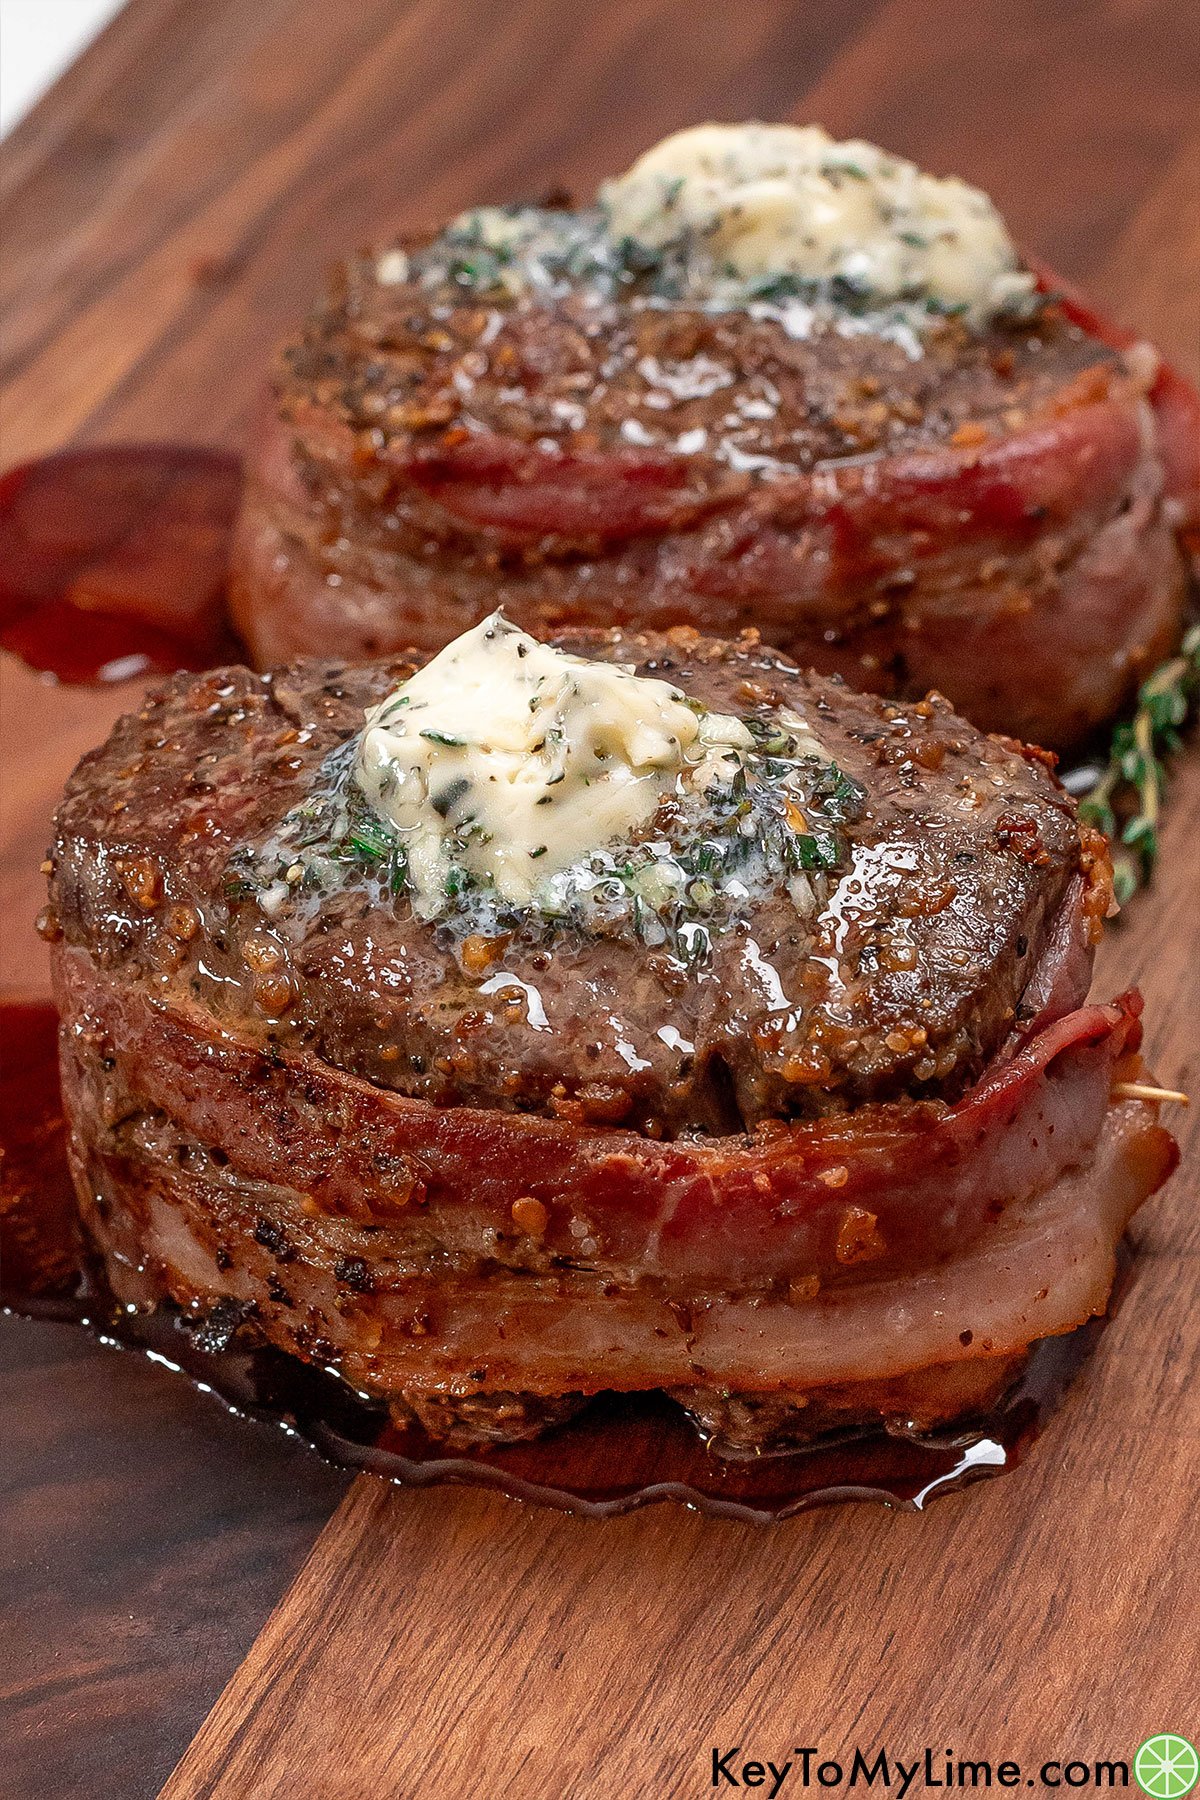 A side image showing the melted butter on top of the pair of cooked filet mignons resting on a cutting board.